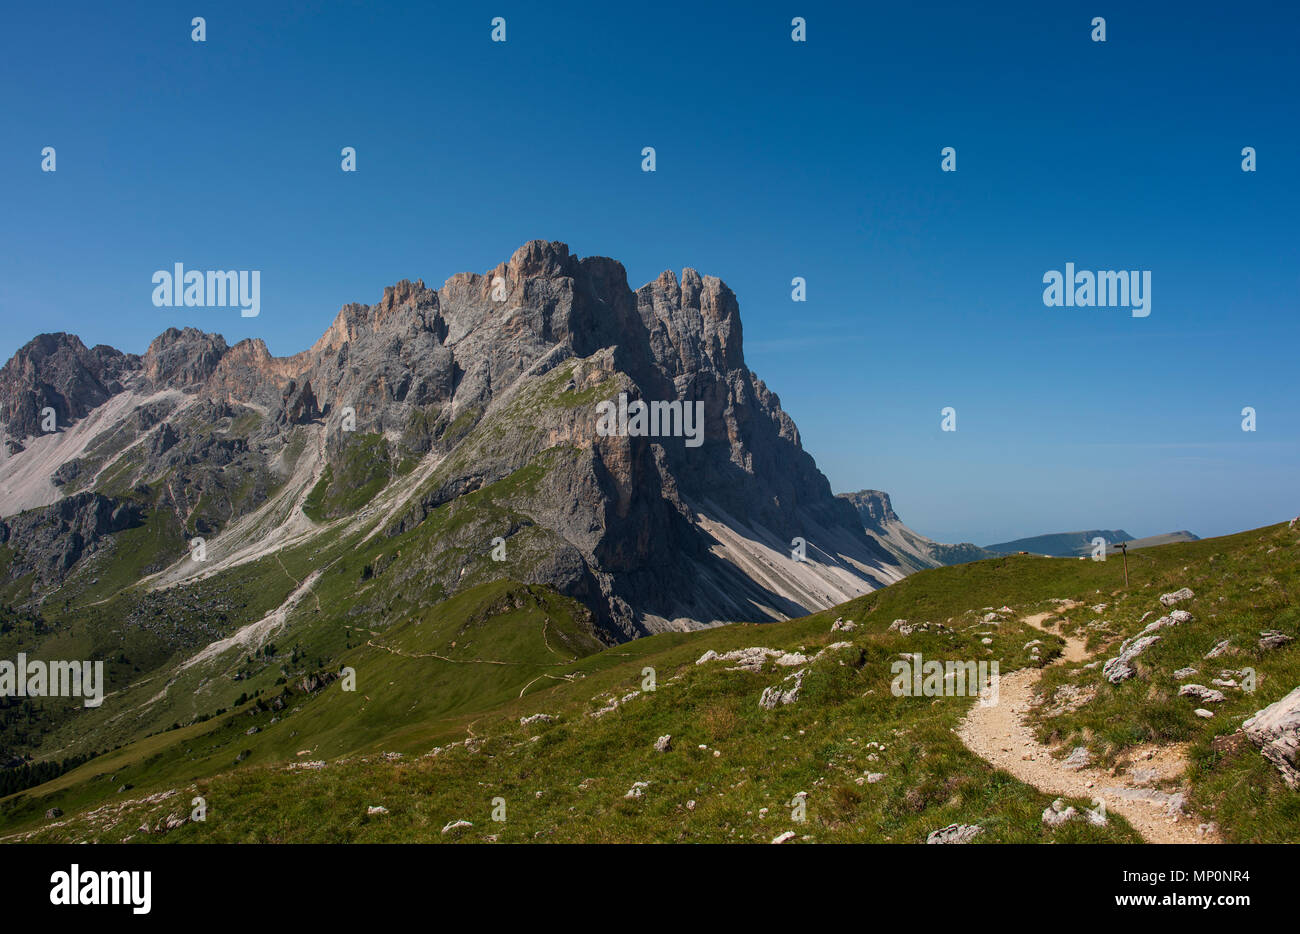 View of the Odle group of mountains, part of The Dolomites in Puez-Odle nature park, South Tyrol, Province of Bolzano, Italy. Stock Photo